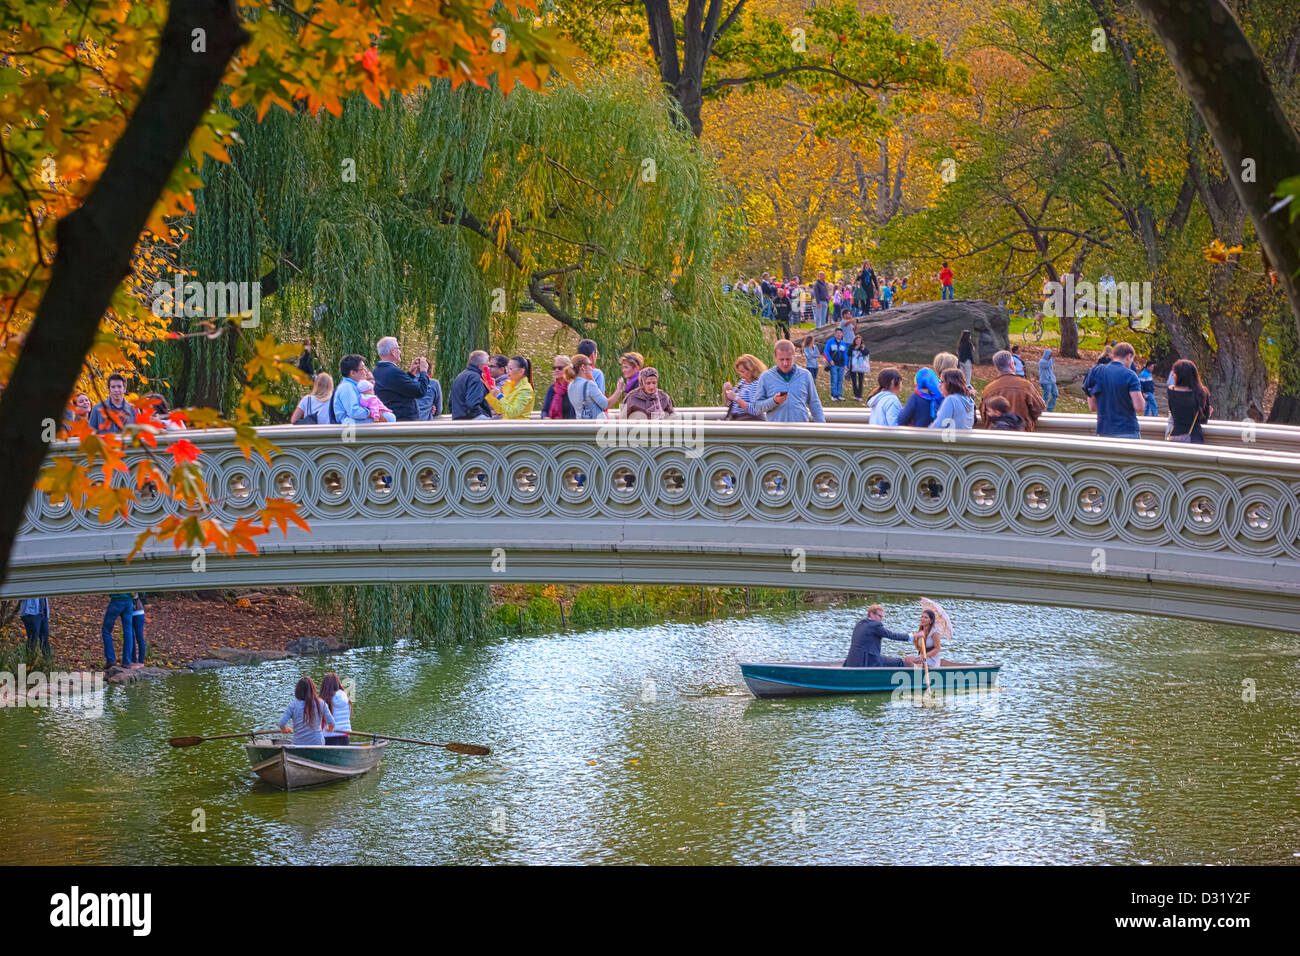 Visitors taking in the sights from the Bow Bridge in Central Park, New York, USA Stock Photo